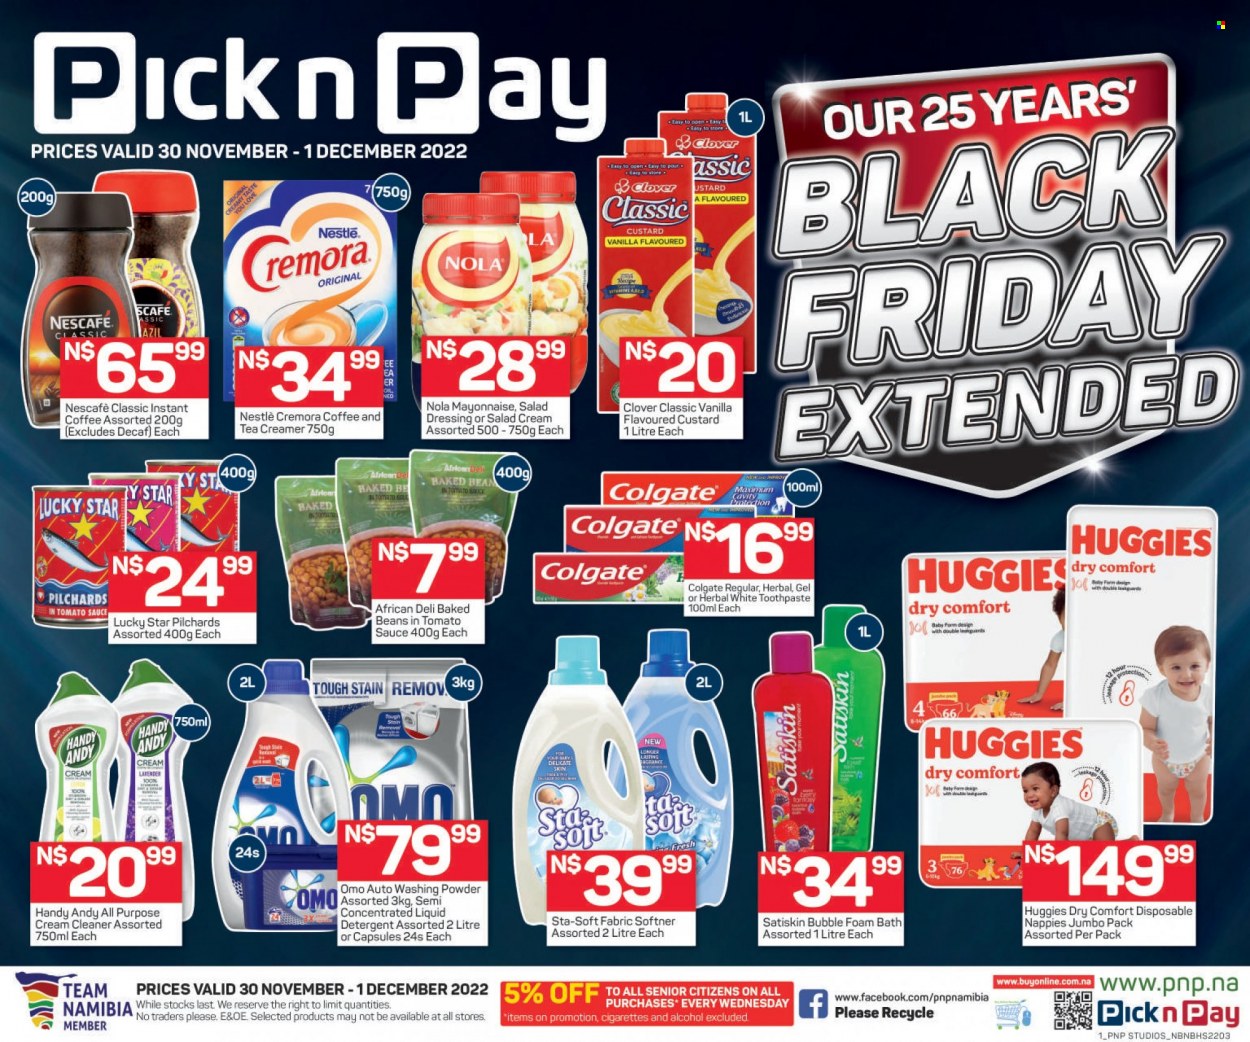 thumbnail - Pick n Pay catalogue  - 30/11/2022 - 01/12/2022 - Sales products - sardines, Clover, creamer, coffee and tea creamer, salad cream, Nestlé, Cremora, baked beans, salad dressing, dressing, tea, instant coffee, Nescafé, alcohol, Huggies, nappies, detergent, cream cleaner, cleaner, Omo, liquid detergent, laundry powder, bath foam, Satiskin, Colgate, toothpaste. Page 1.